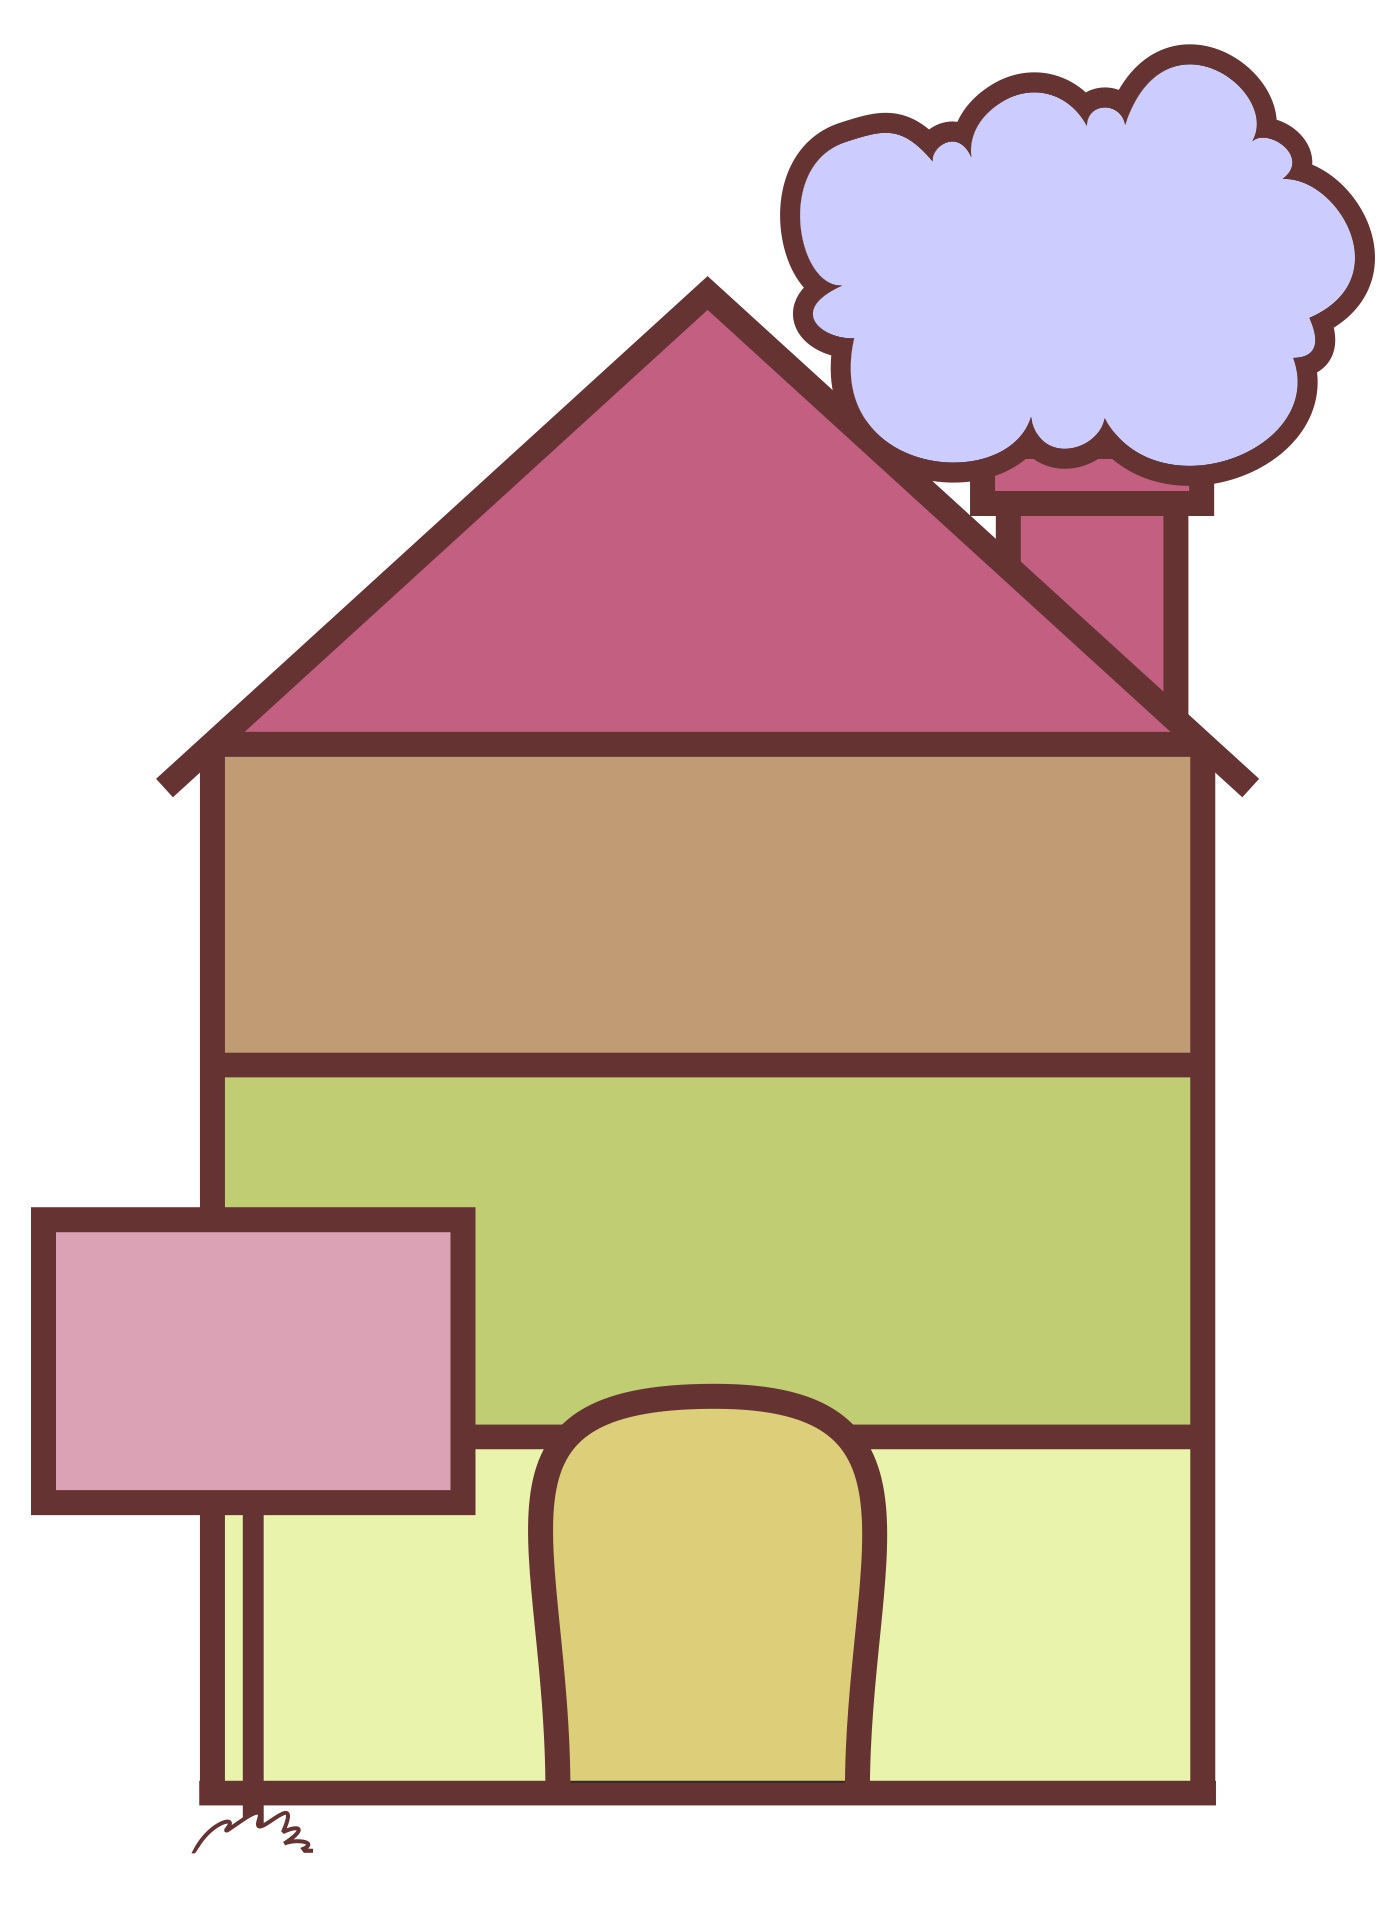 Draw Your DBT House Template